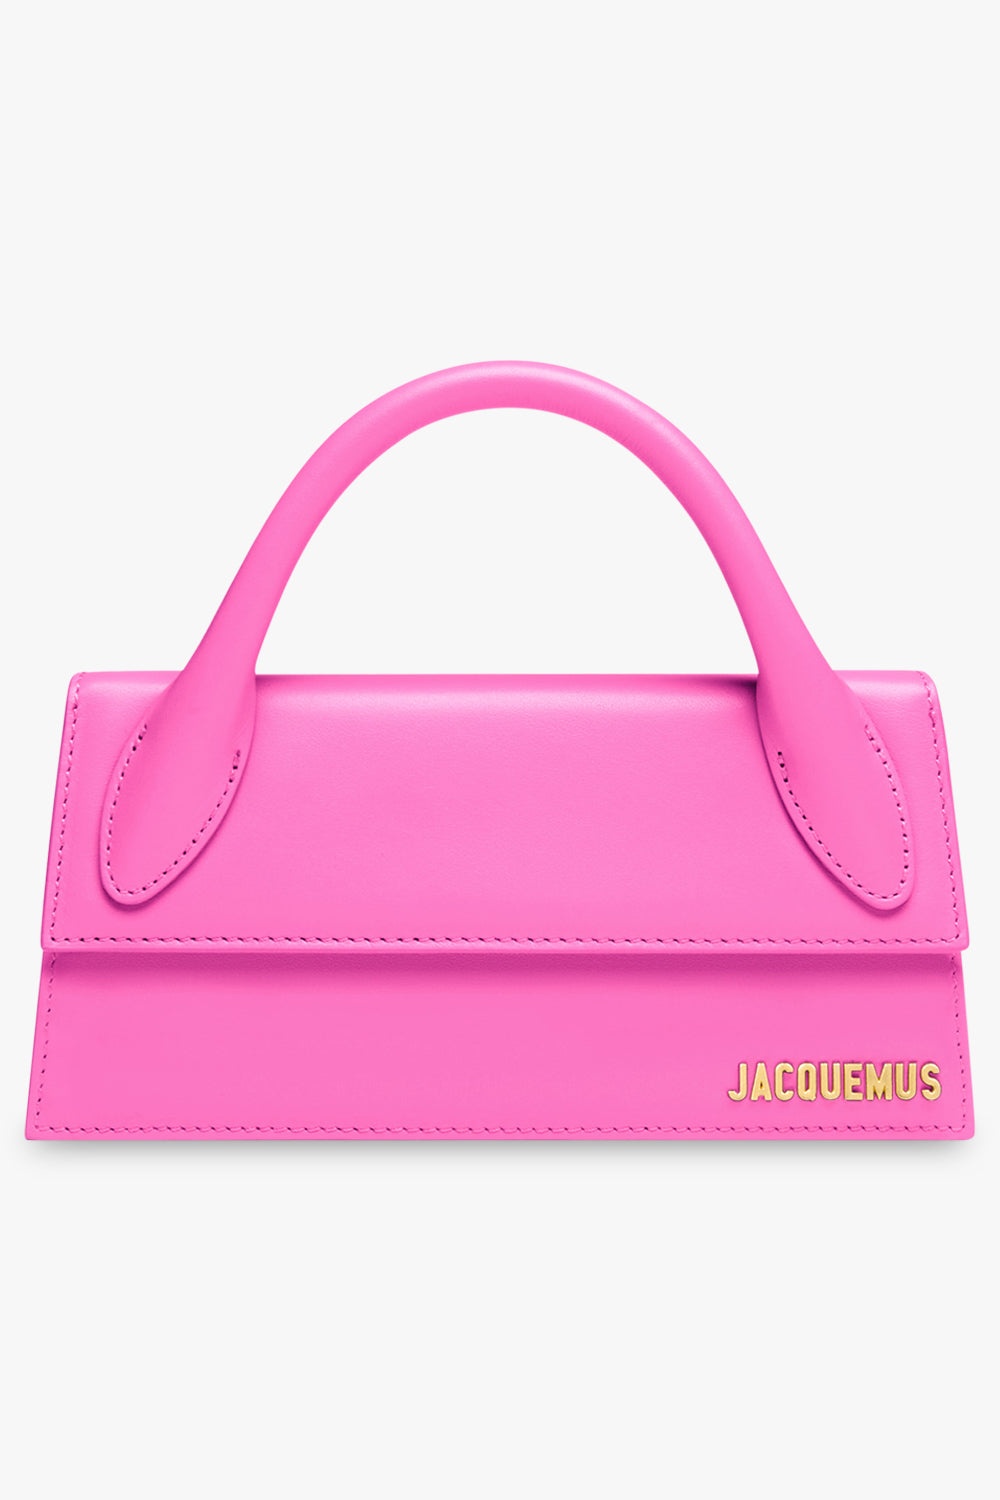 LE CHIQUITO LONG BAG | NEON PINK - 1